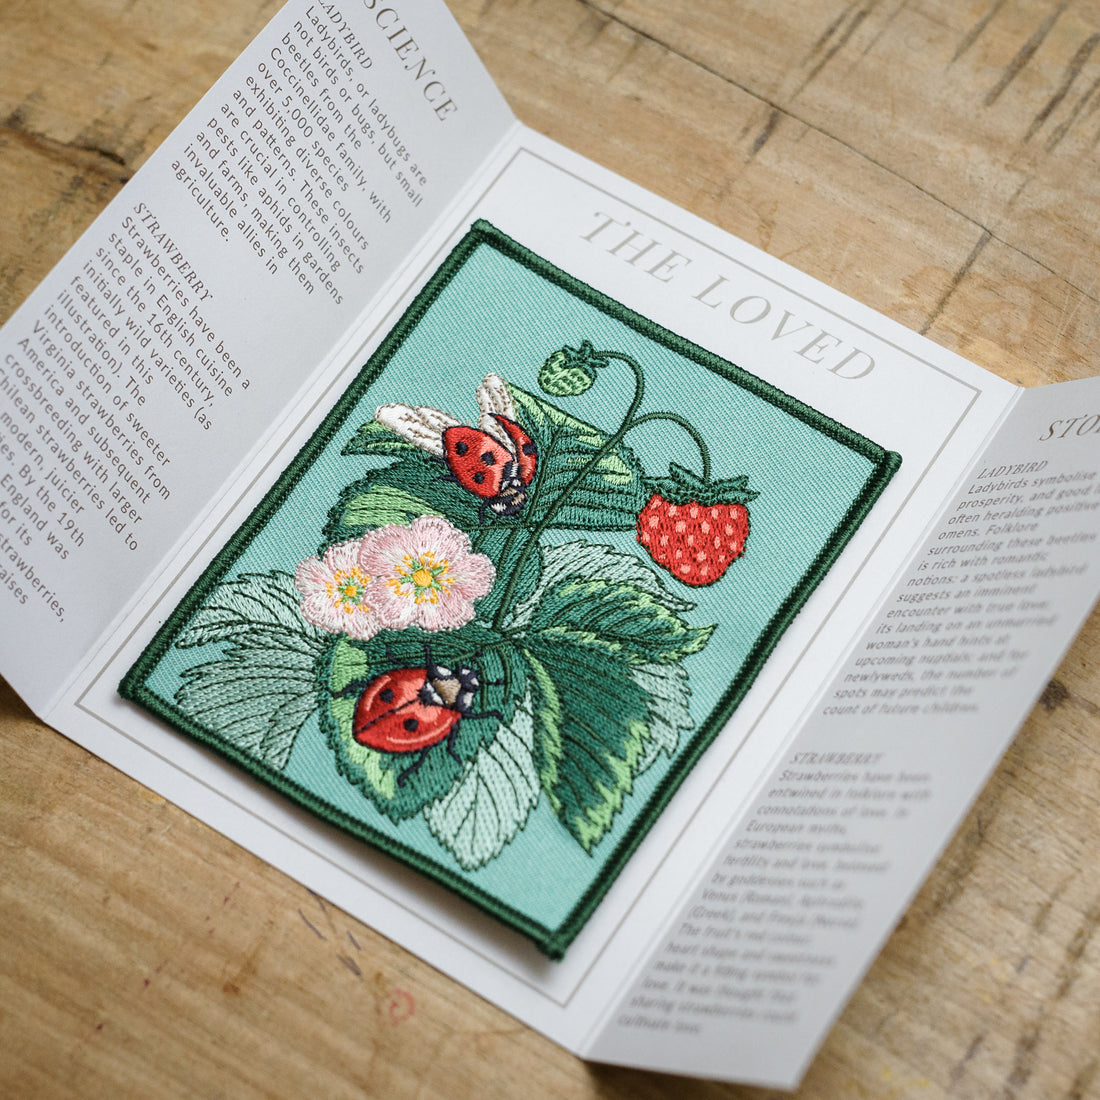 Ladybird and Strawberry Embroidered Patch in gatefold card with science and story behind the species